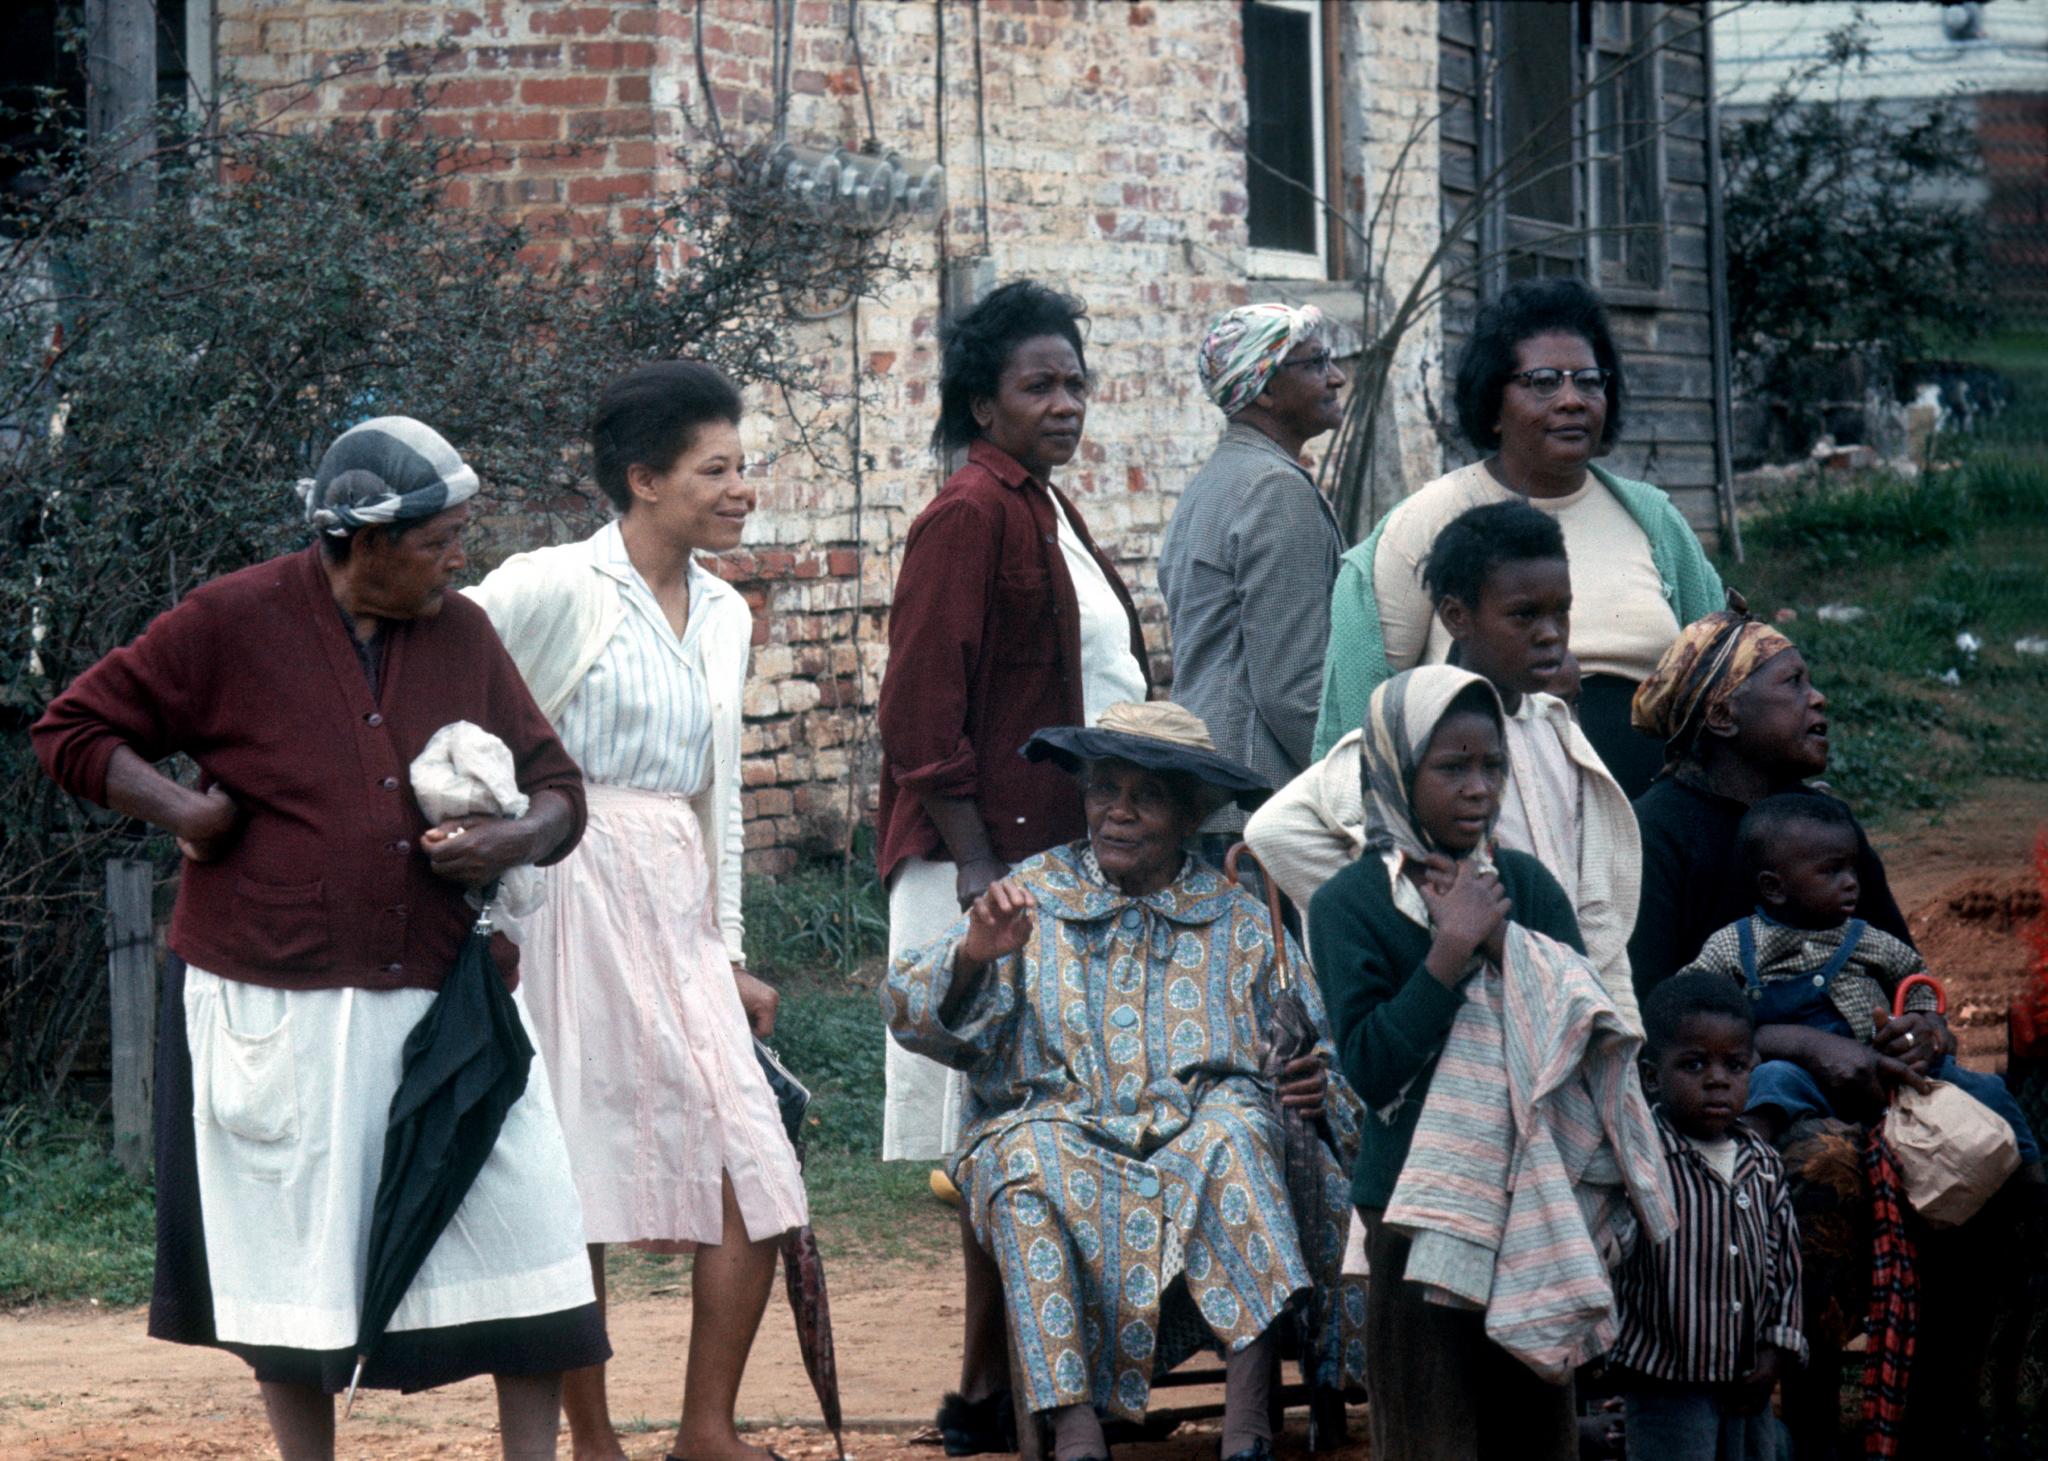 PHOTOS: See Candid Pics from Martin Luther King, Jr.'s 1965 Selma March